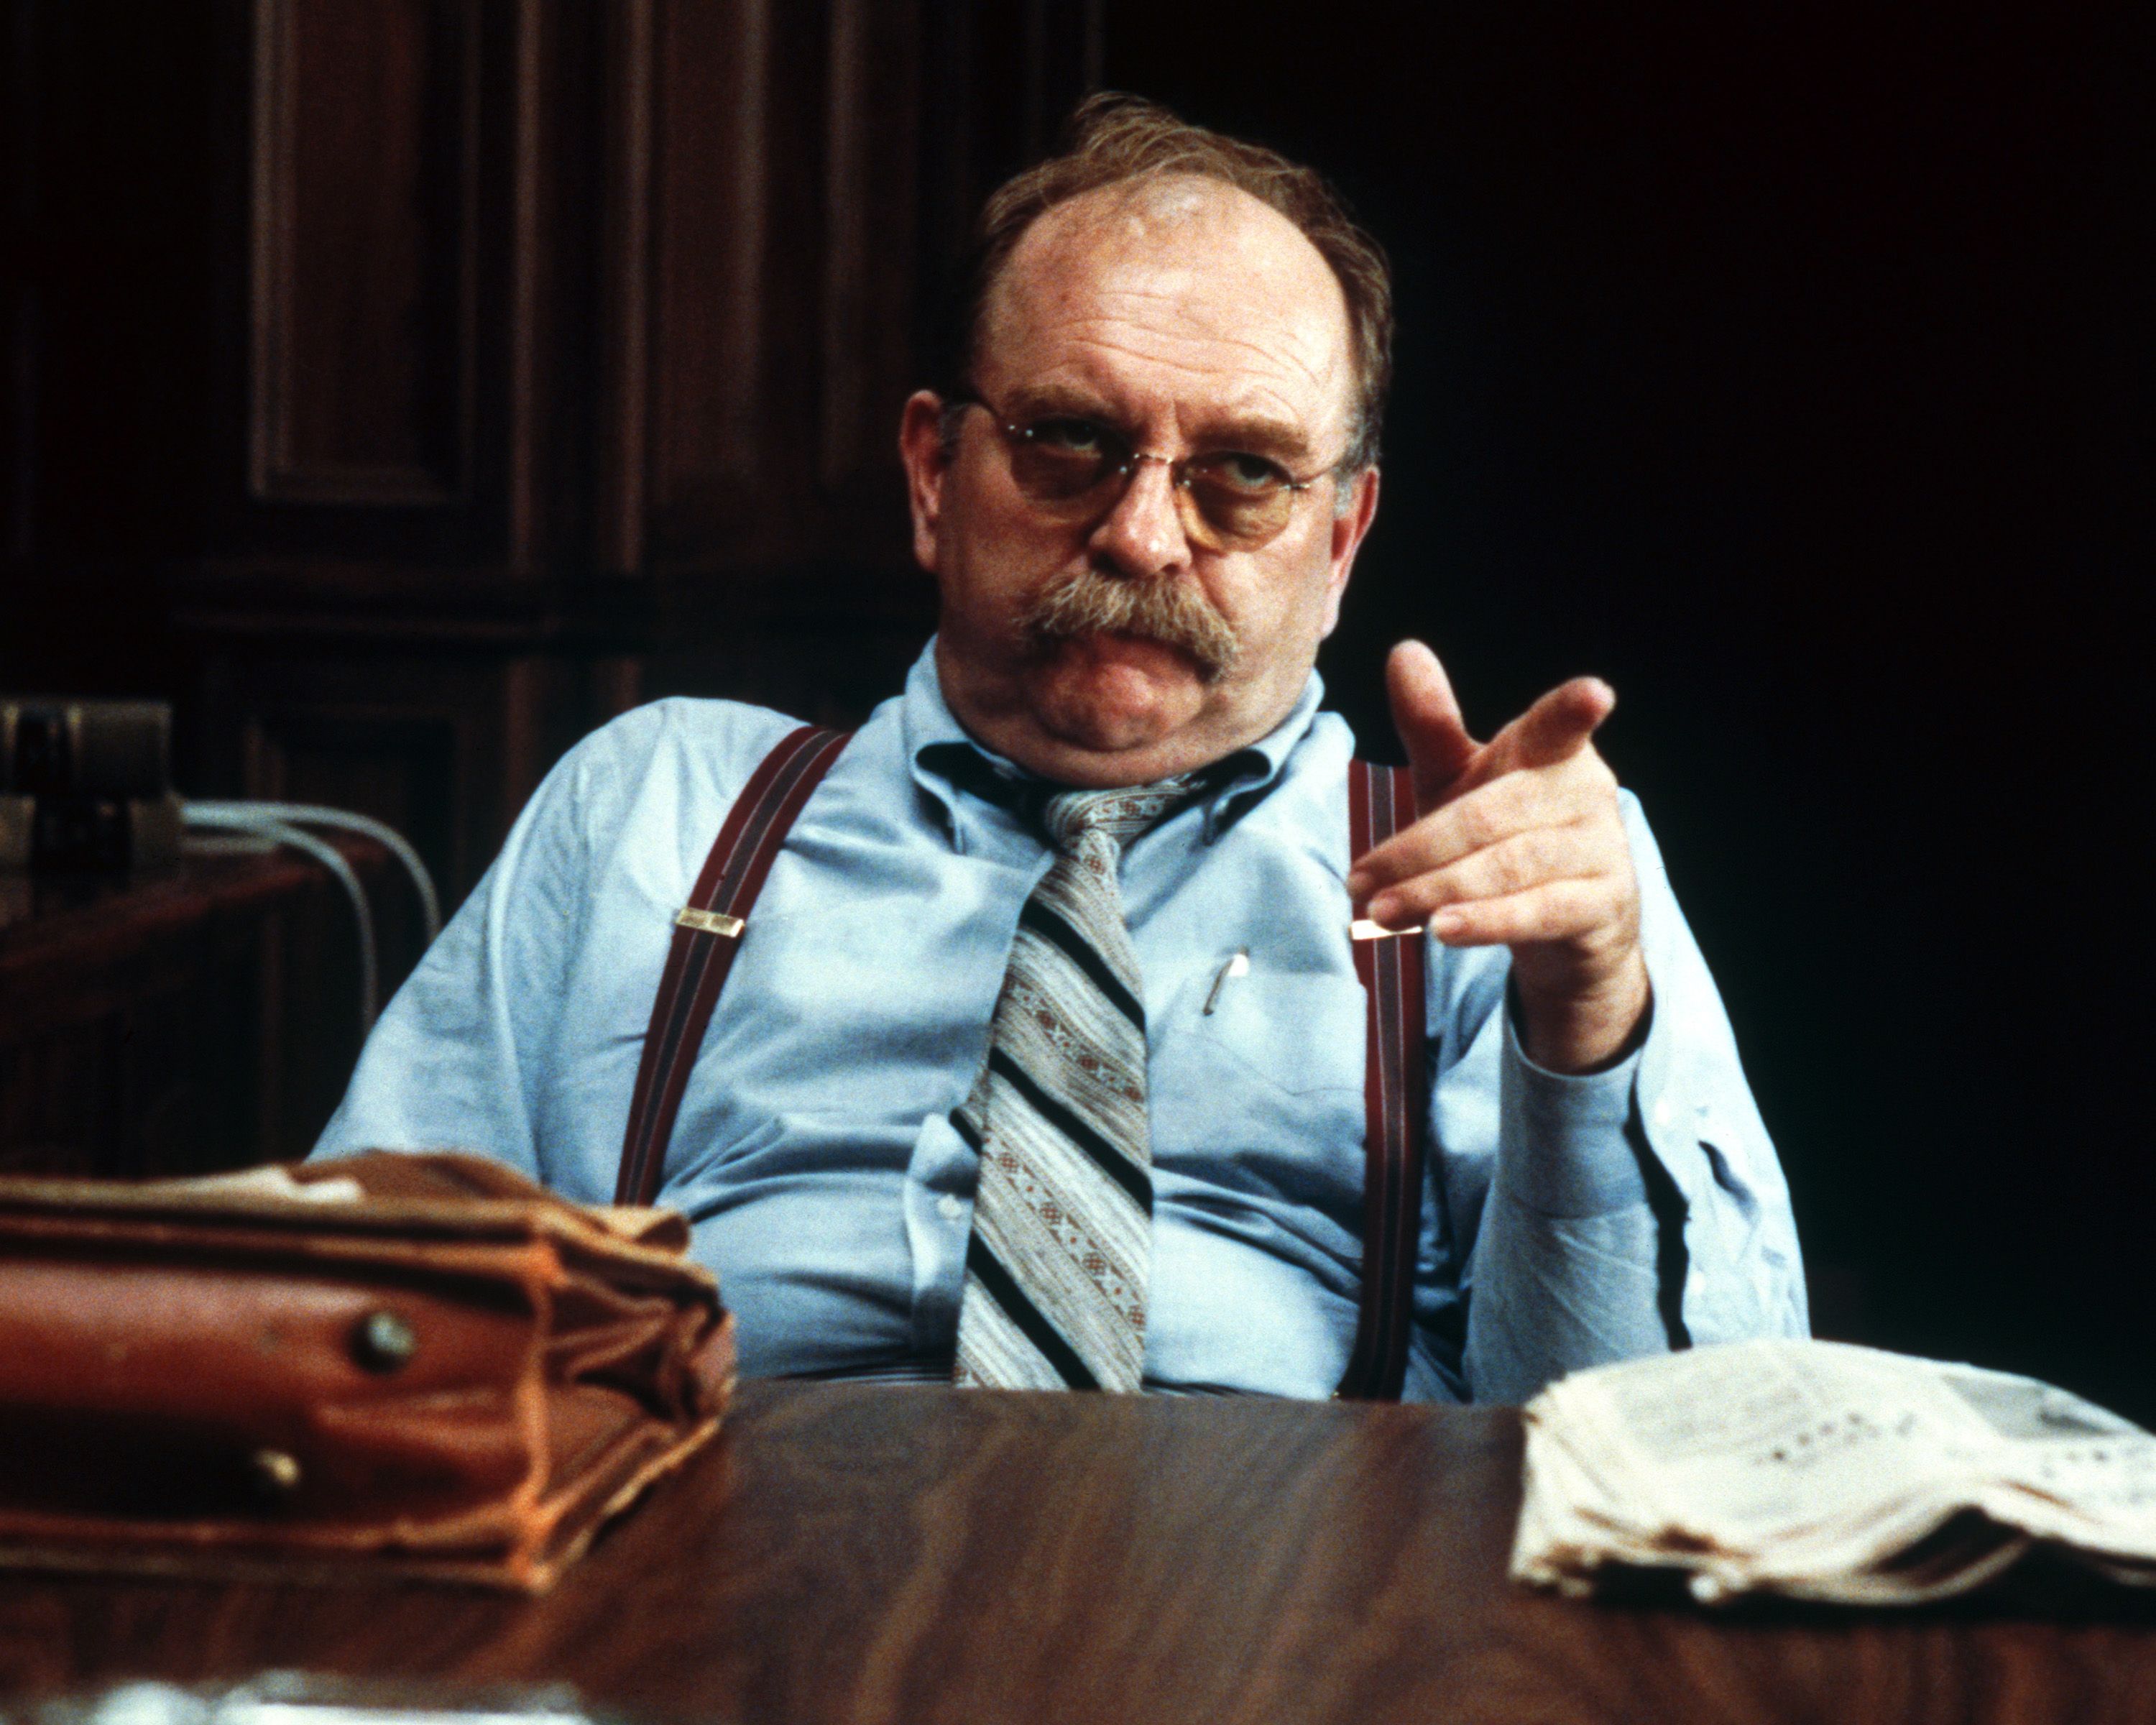 Actor Wilford Brimley sitting behind a desk during a scene from Sydney Pollack's "Absence of Malice" in 1981 | Photo: Silver Screen Collection/Getty Images